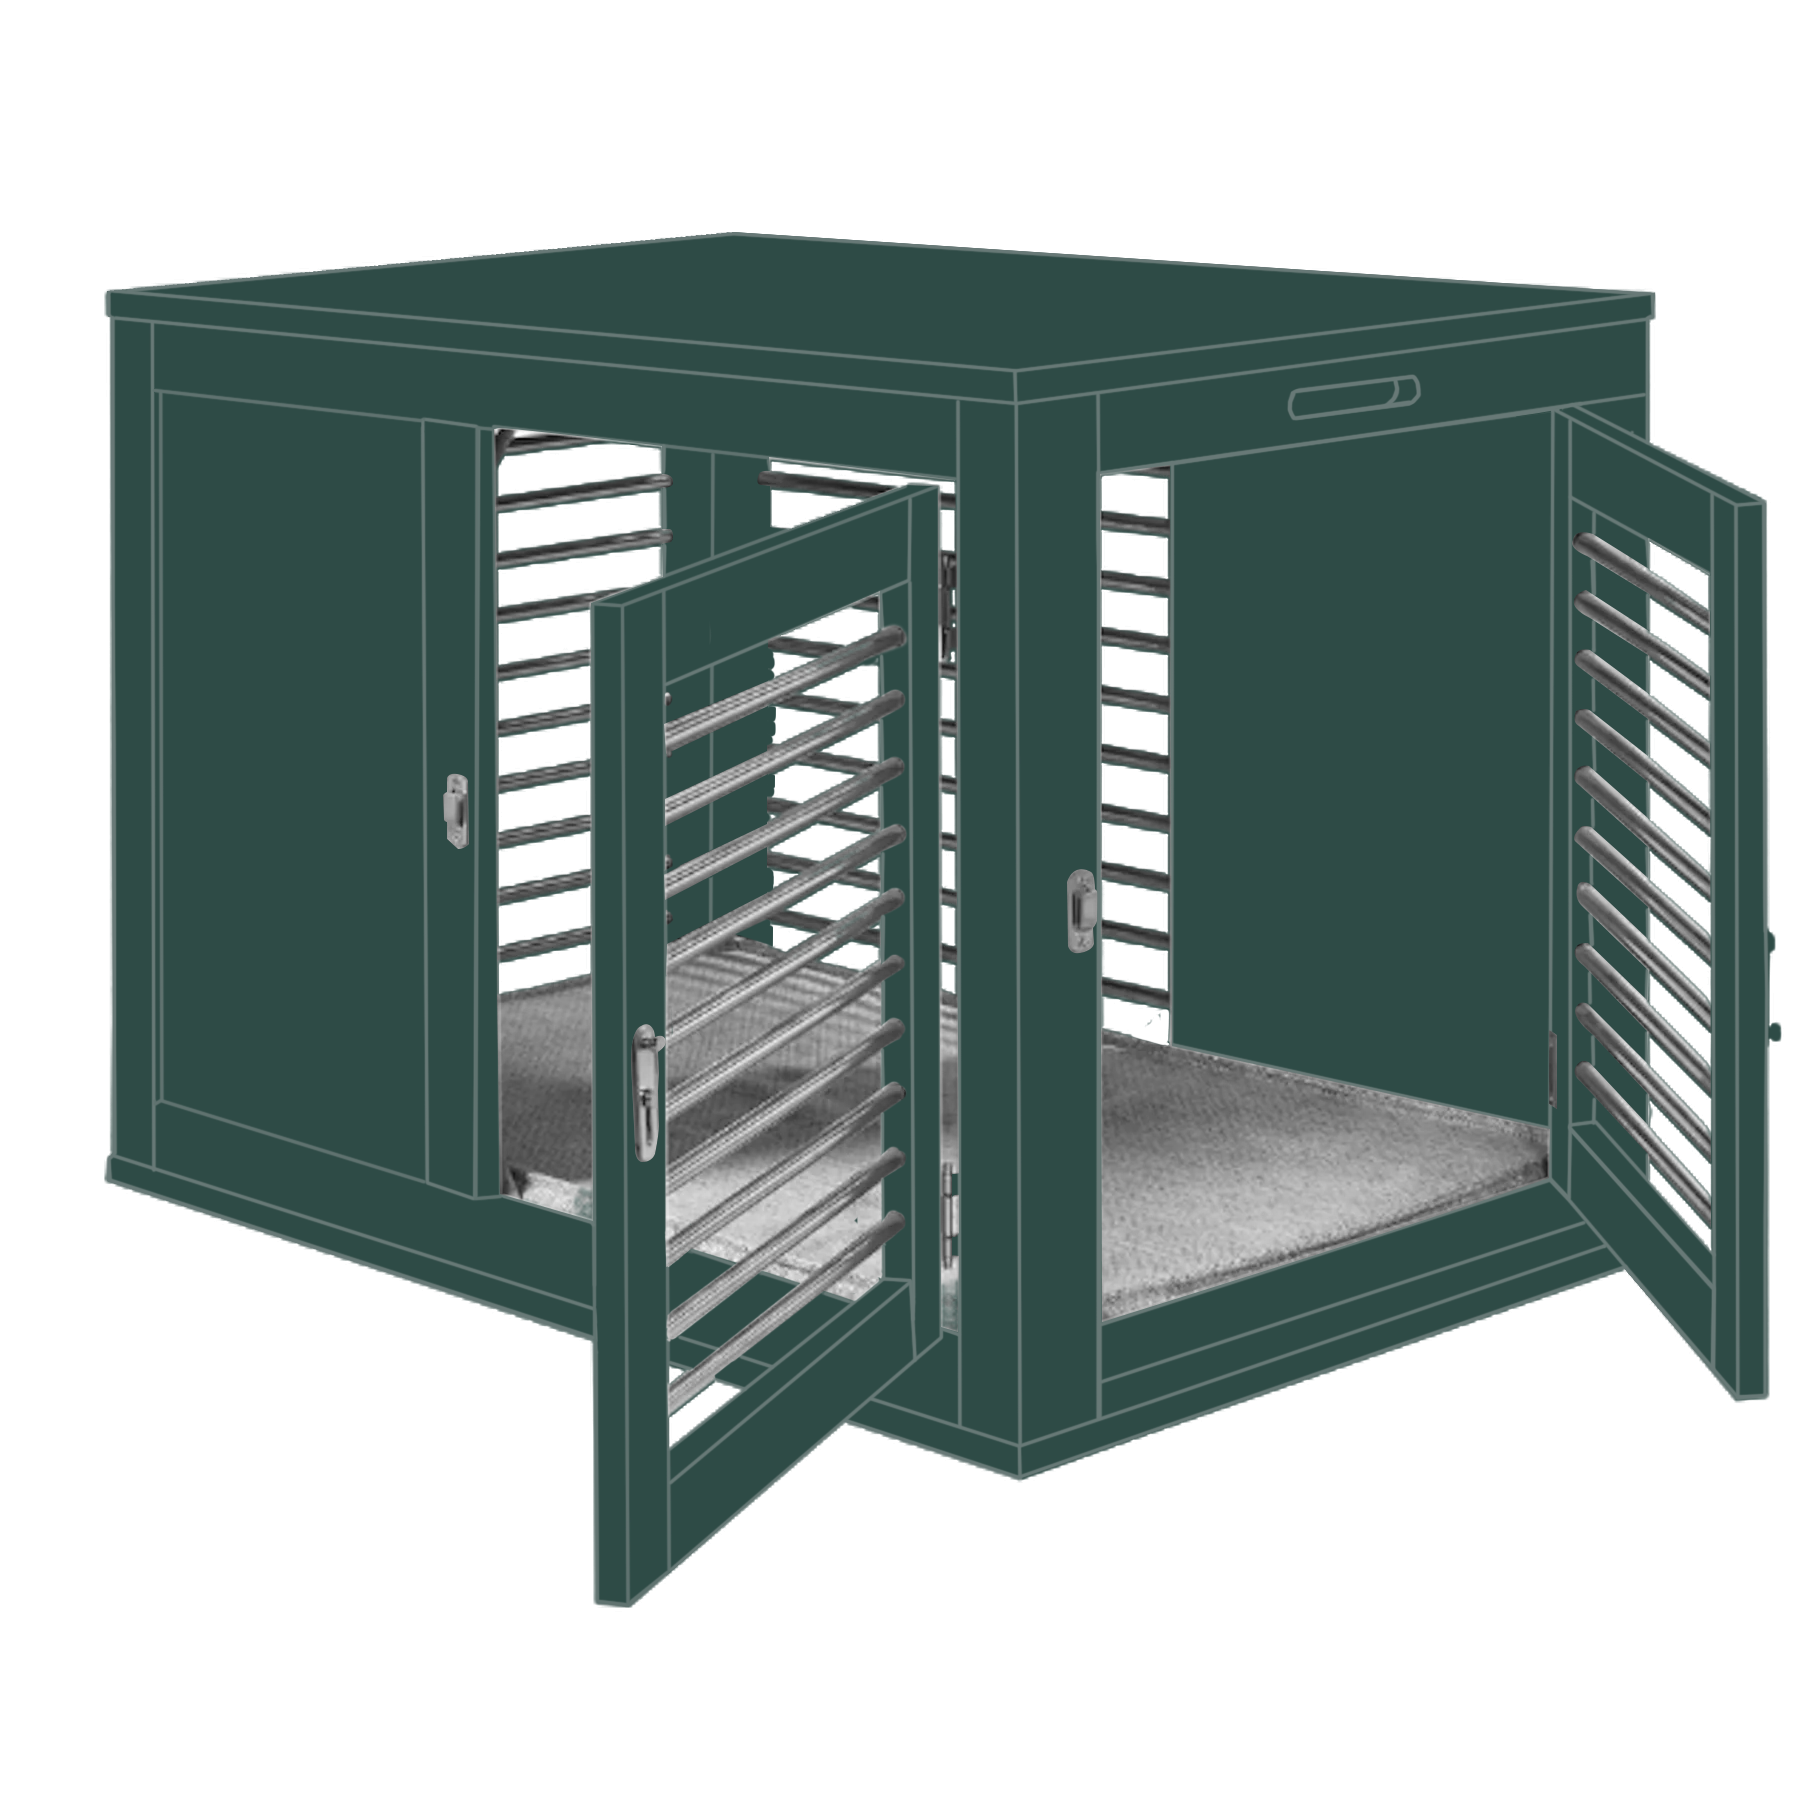 eucalyptus-solid-green-moderno-crate-dog-kennel